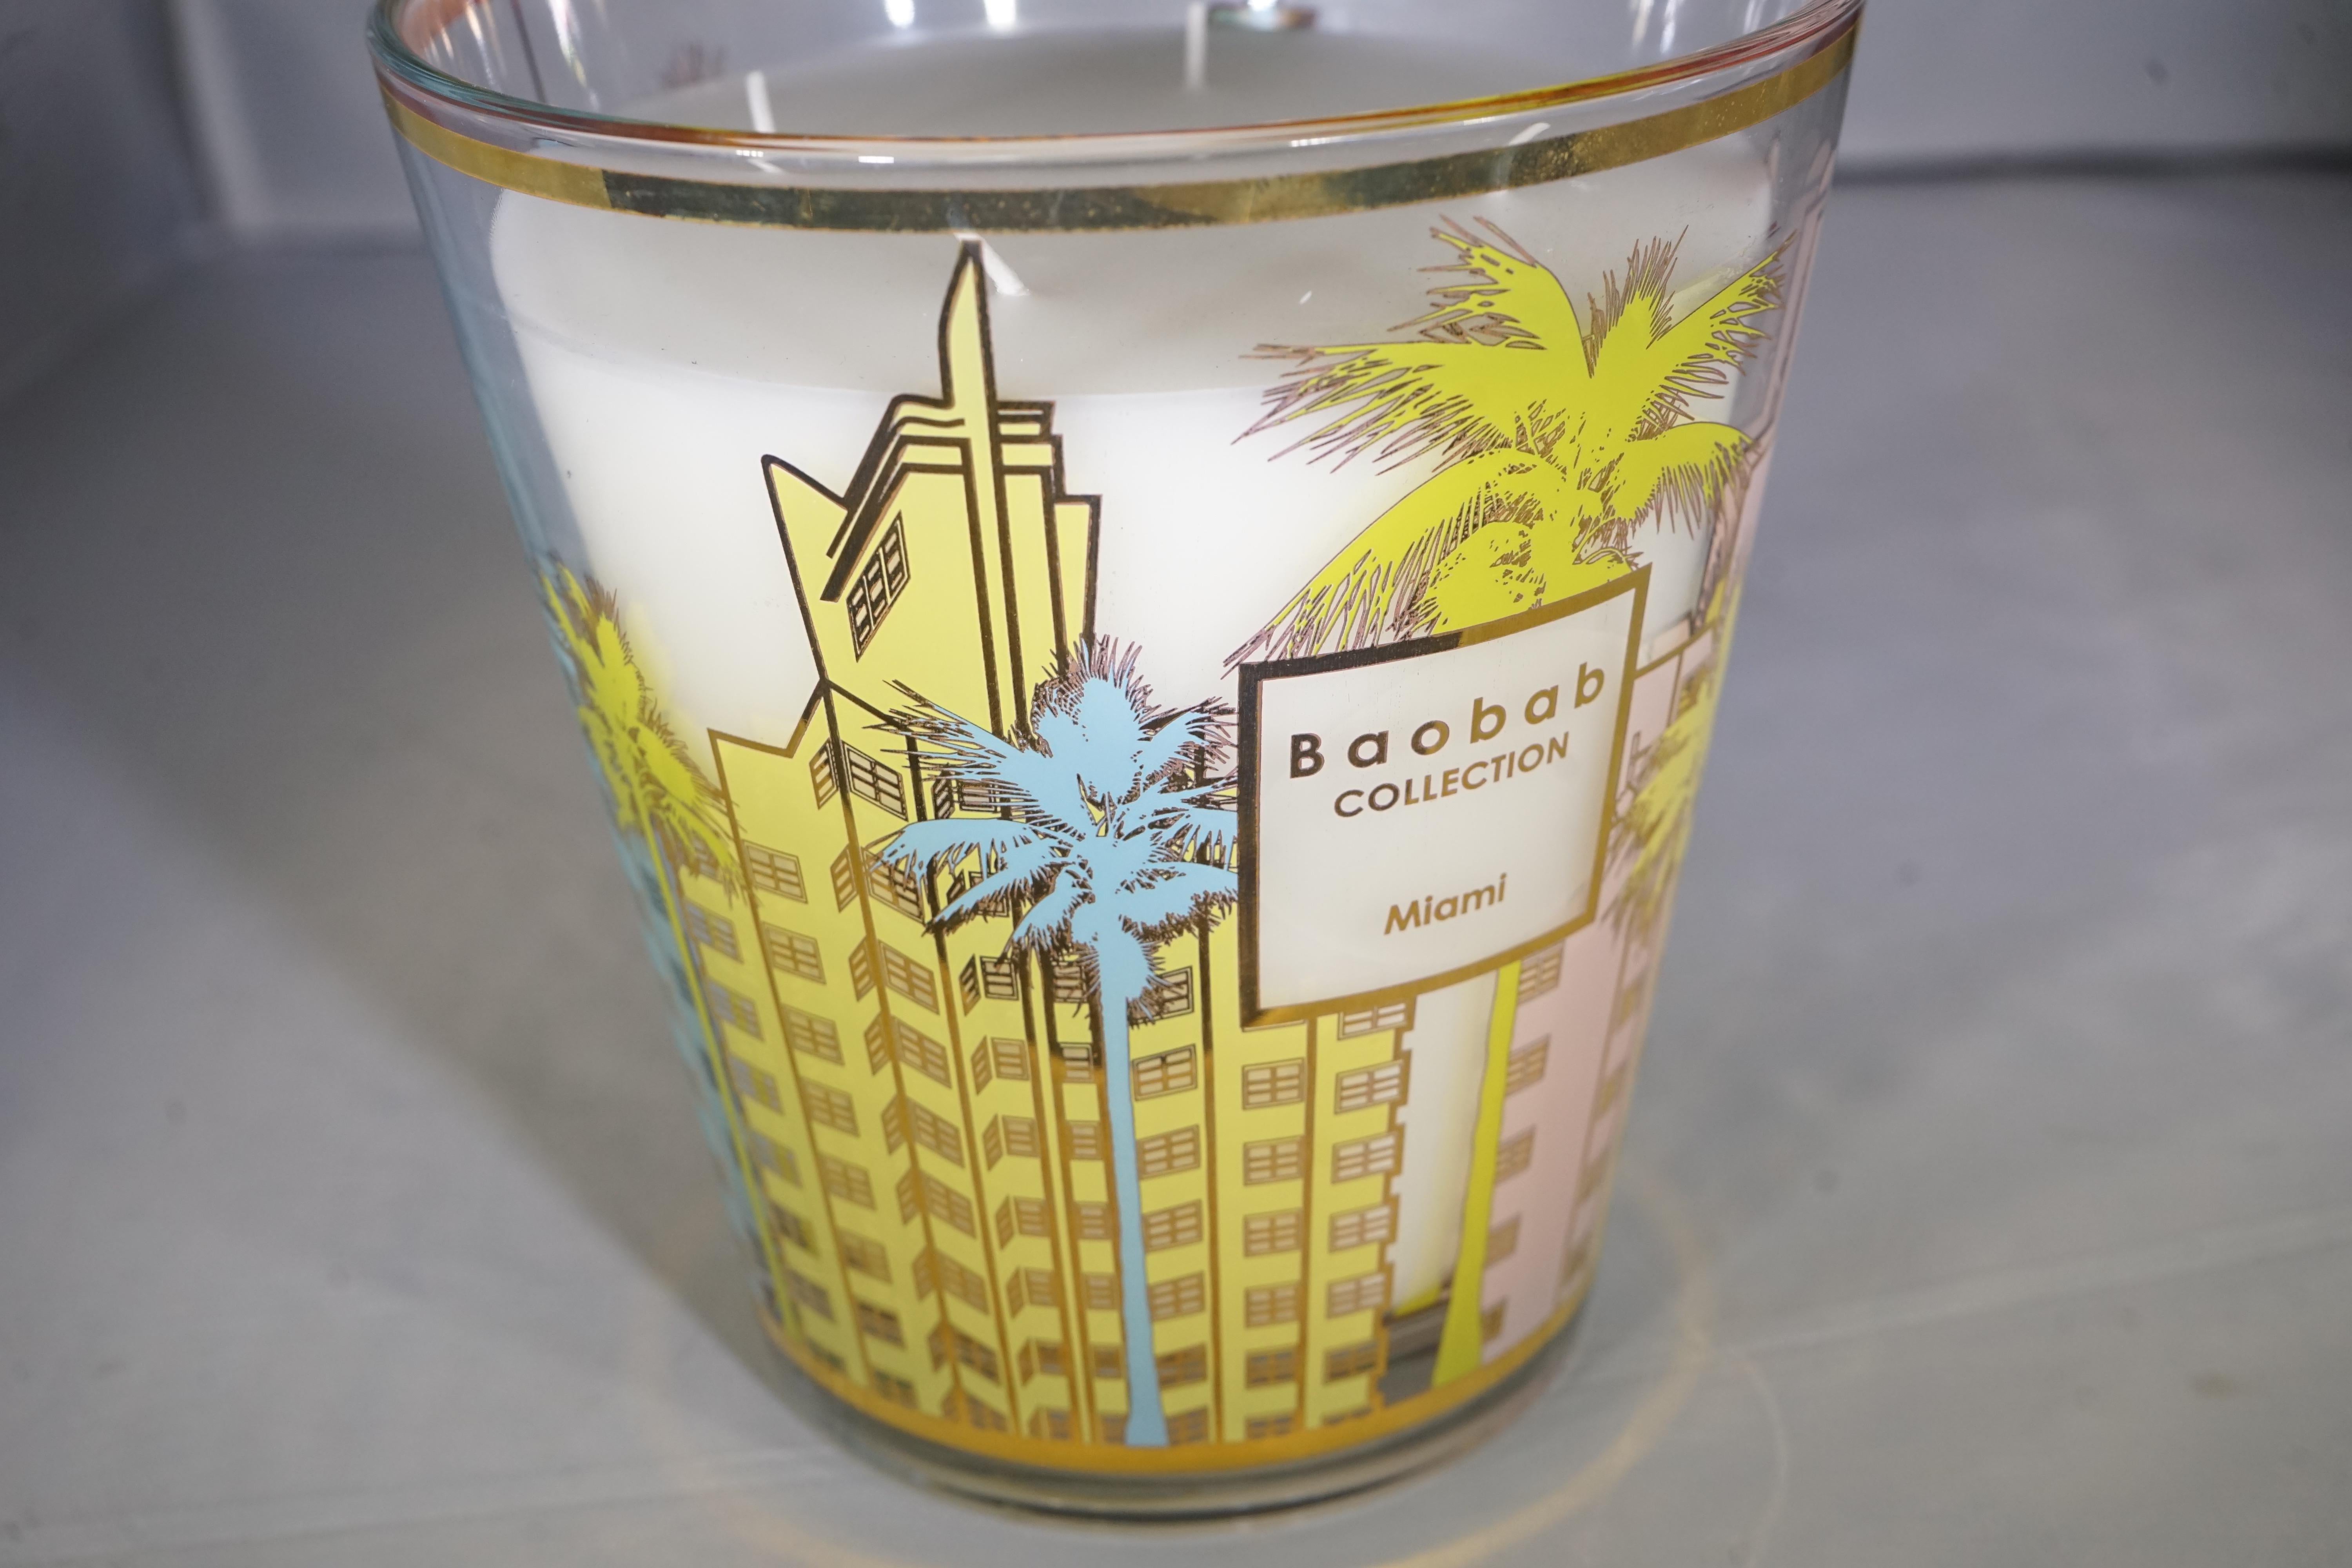 Contemporary Baobab collection luxury scented glass Miami candle with palm tree and multi-color Miami architectural design.